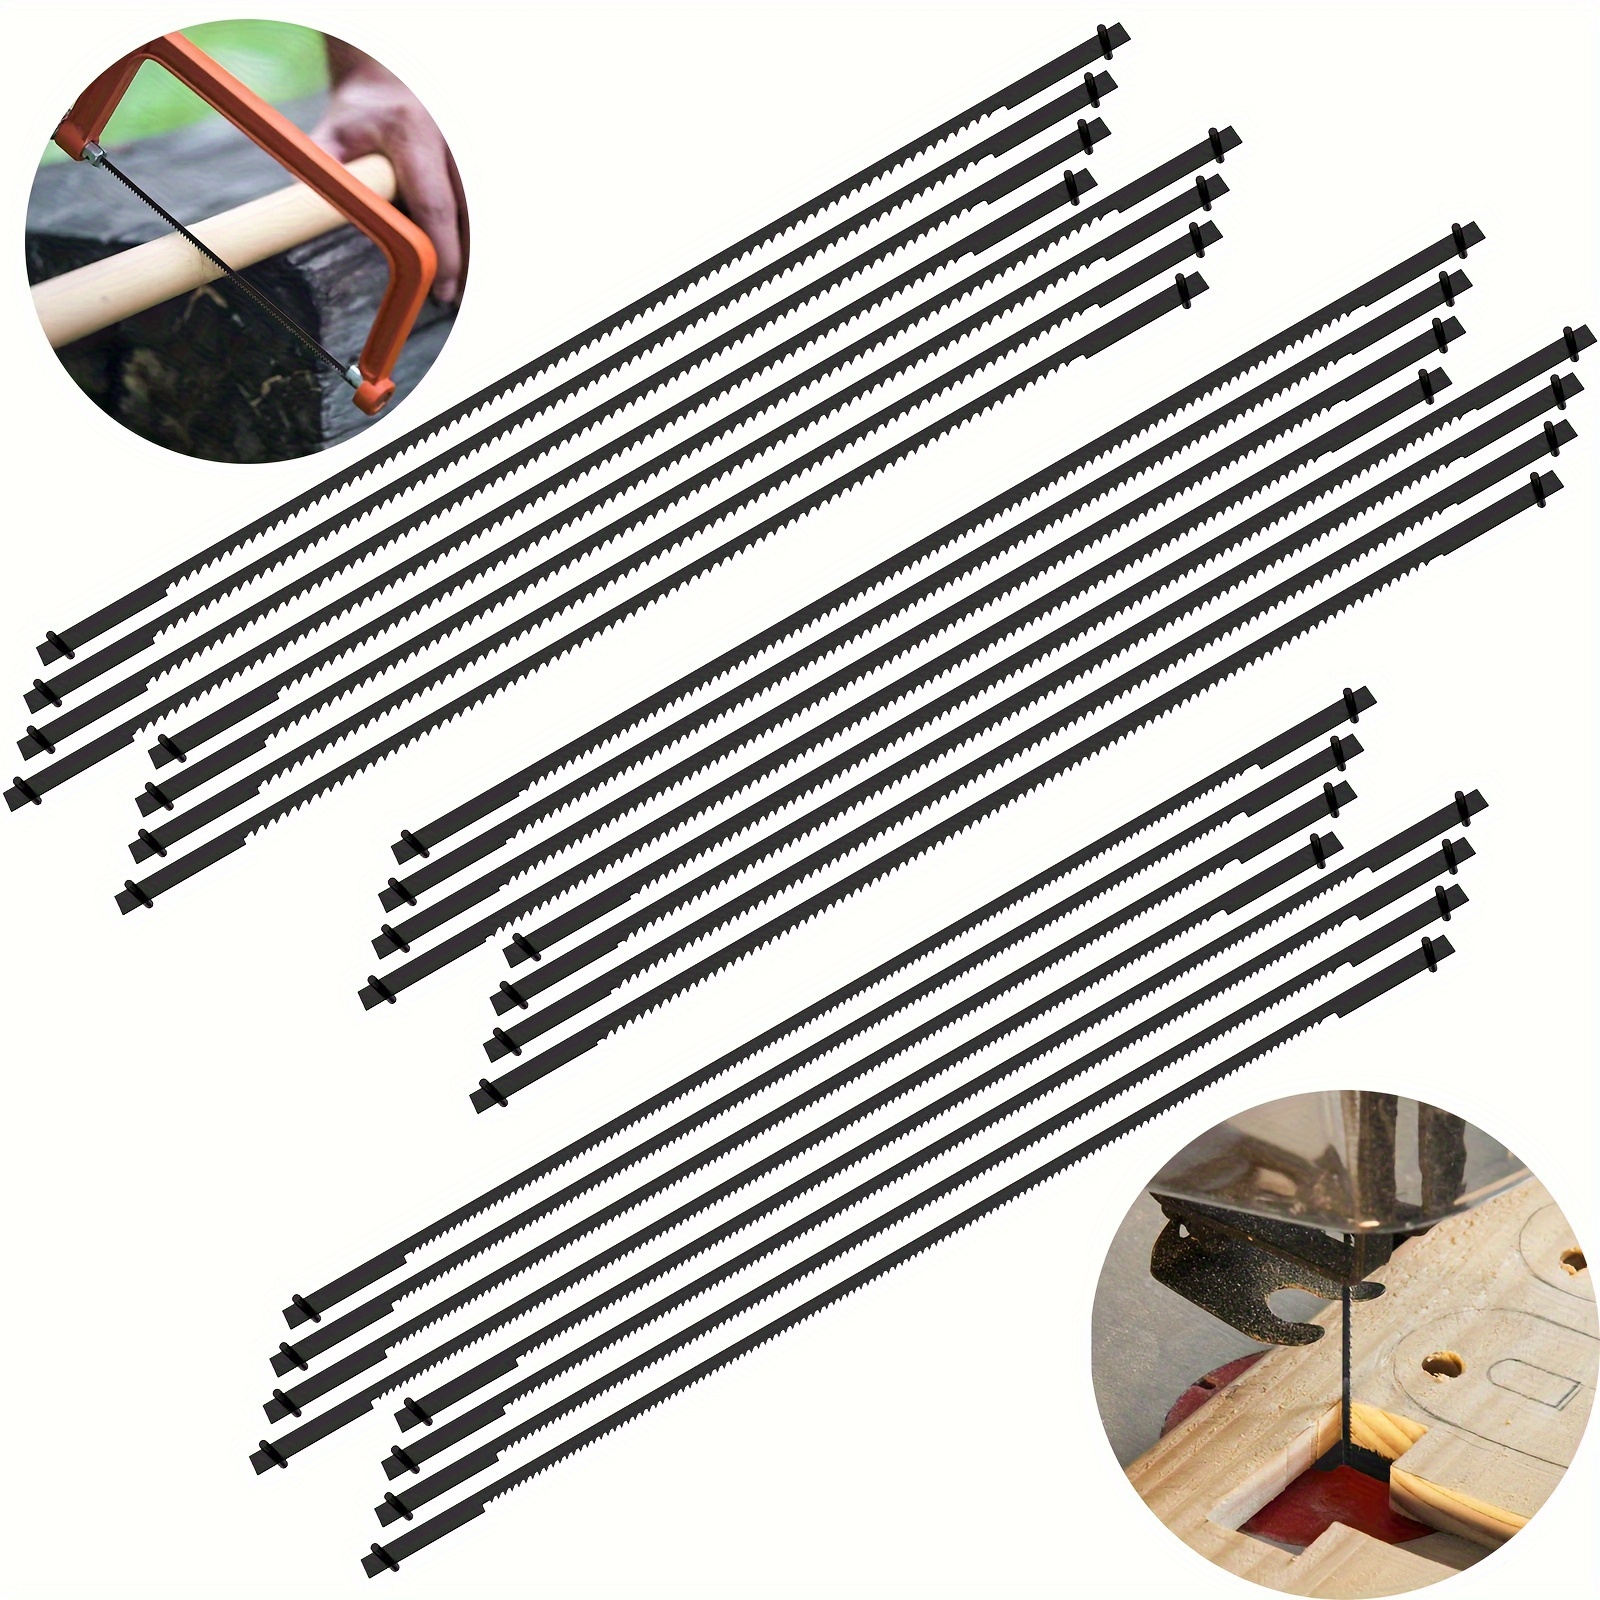 48pcs Scroll Saw Blade Set 5 Inch Pin End Scroll Saw Blades SK5 Carbon  Steel Coping Saw Blade Jig Saw Blades Woodworking Tool Hand Saw for Wood